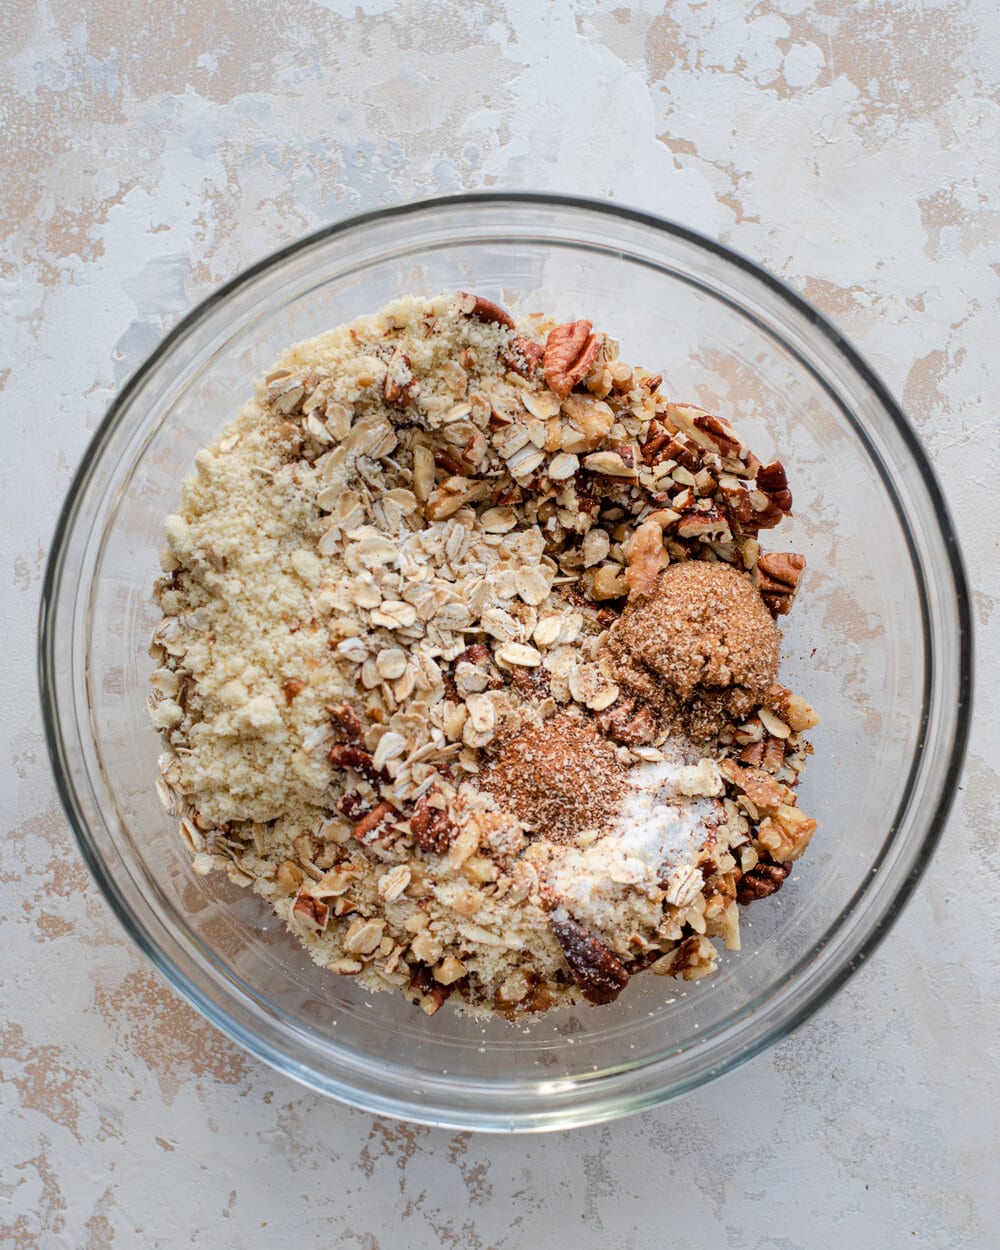 Crumble topping ingredients all together in a glass bowl.